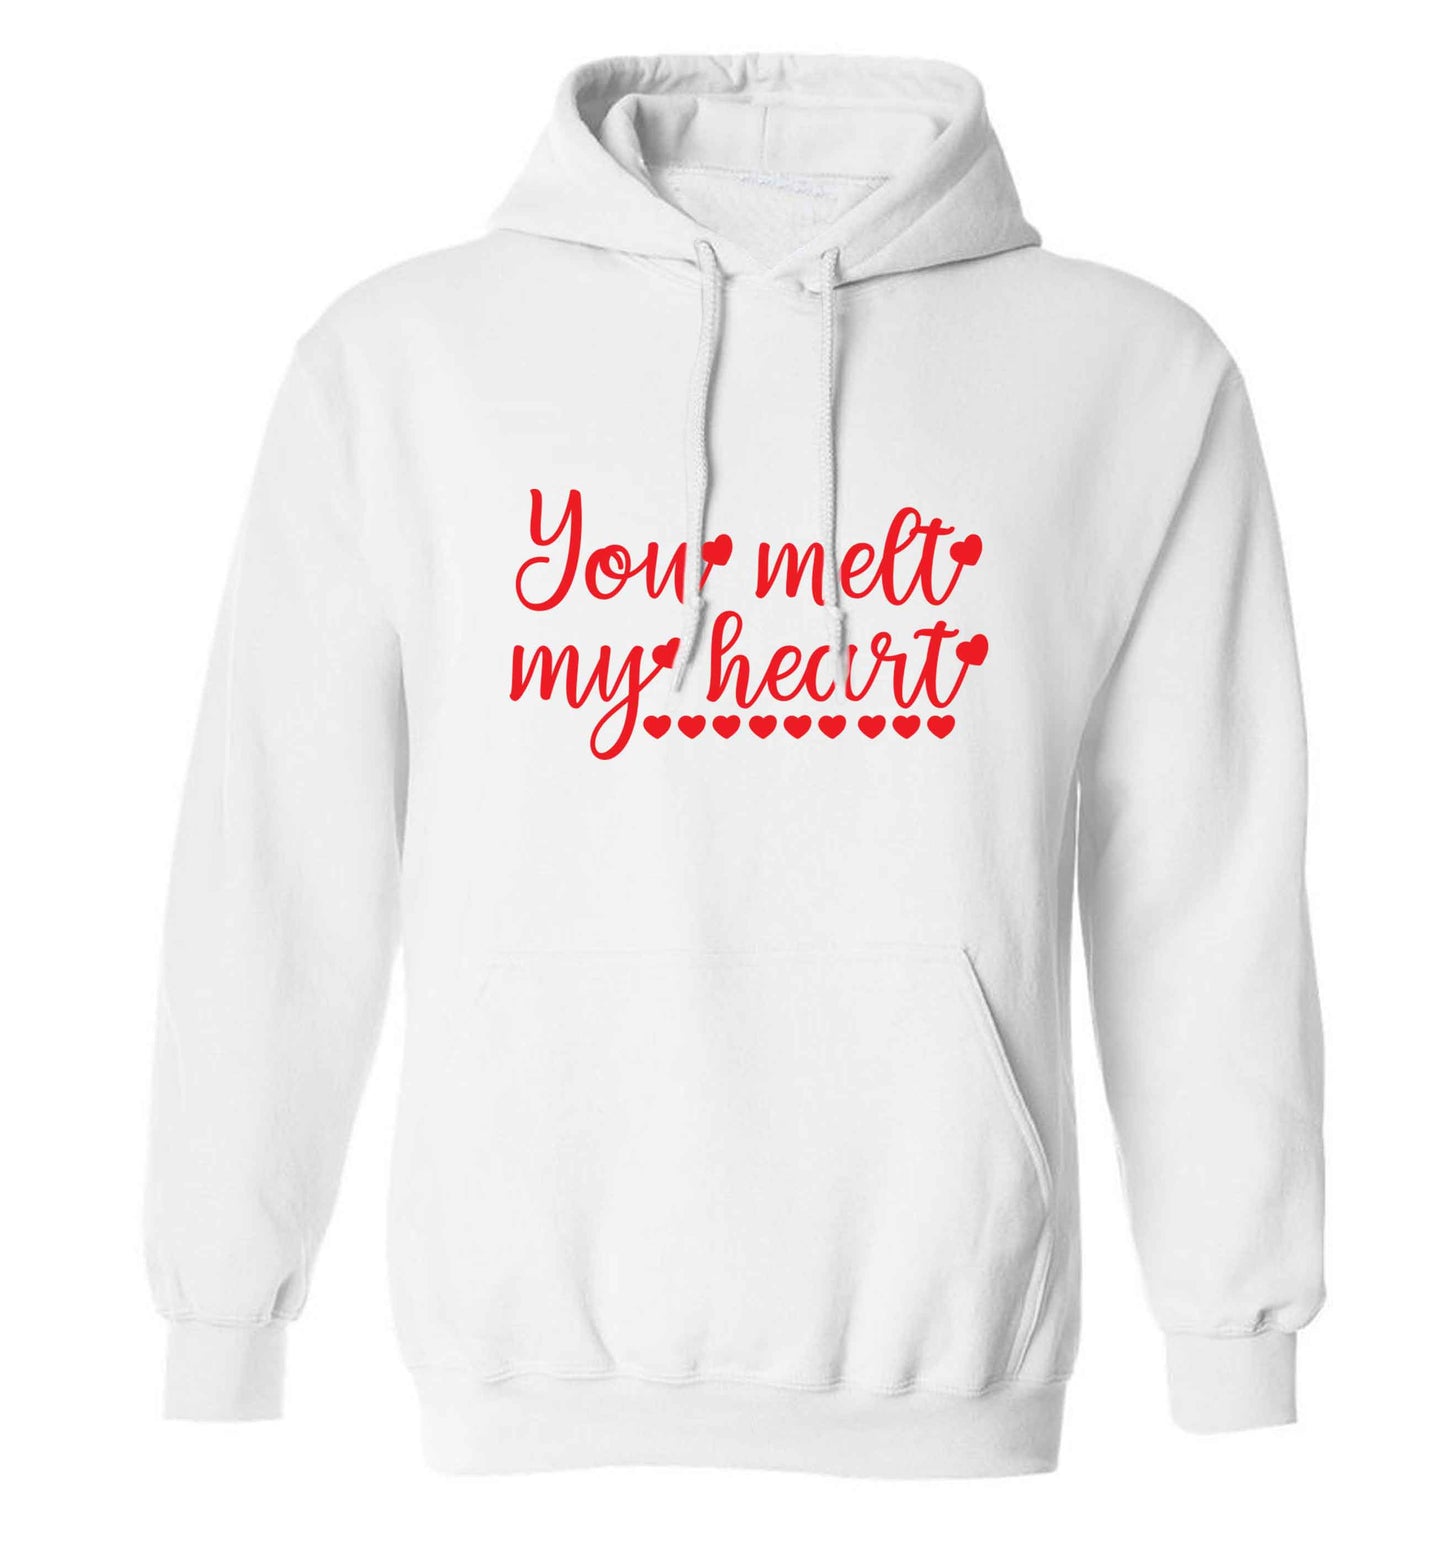 You melt my heart adults unisex white hoodie 2XL